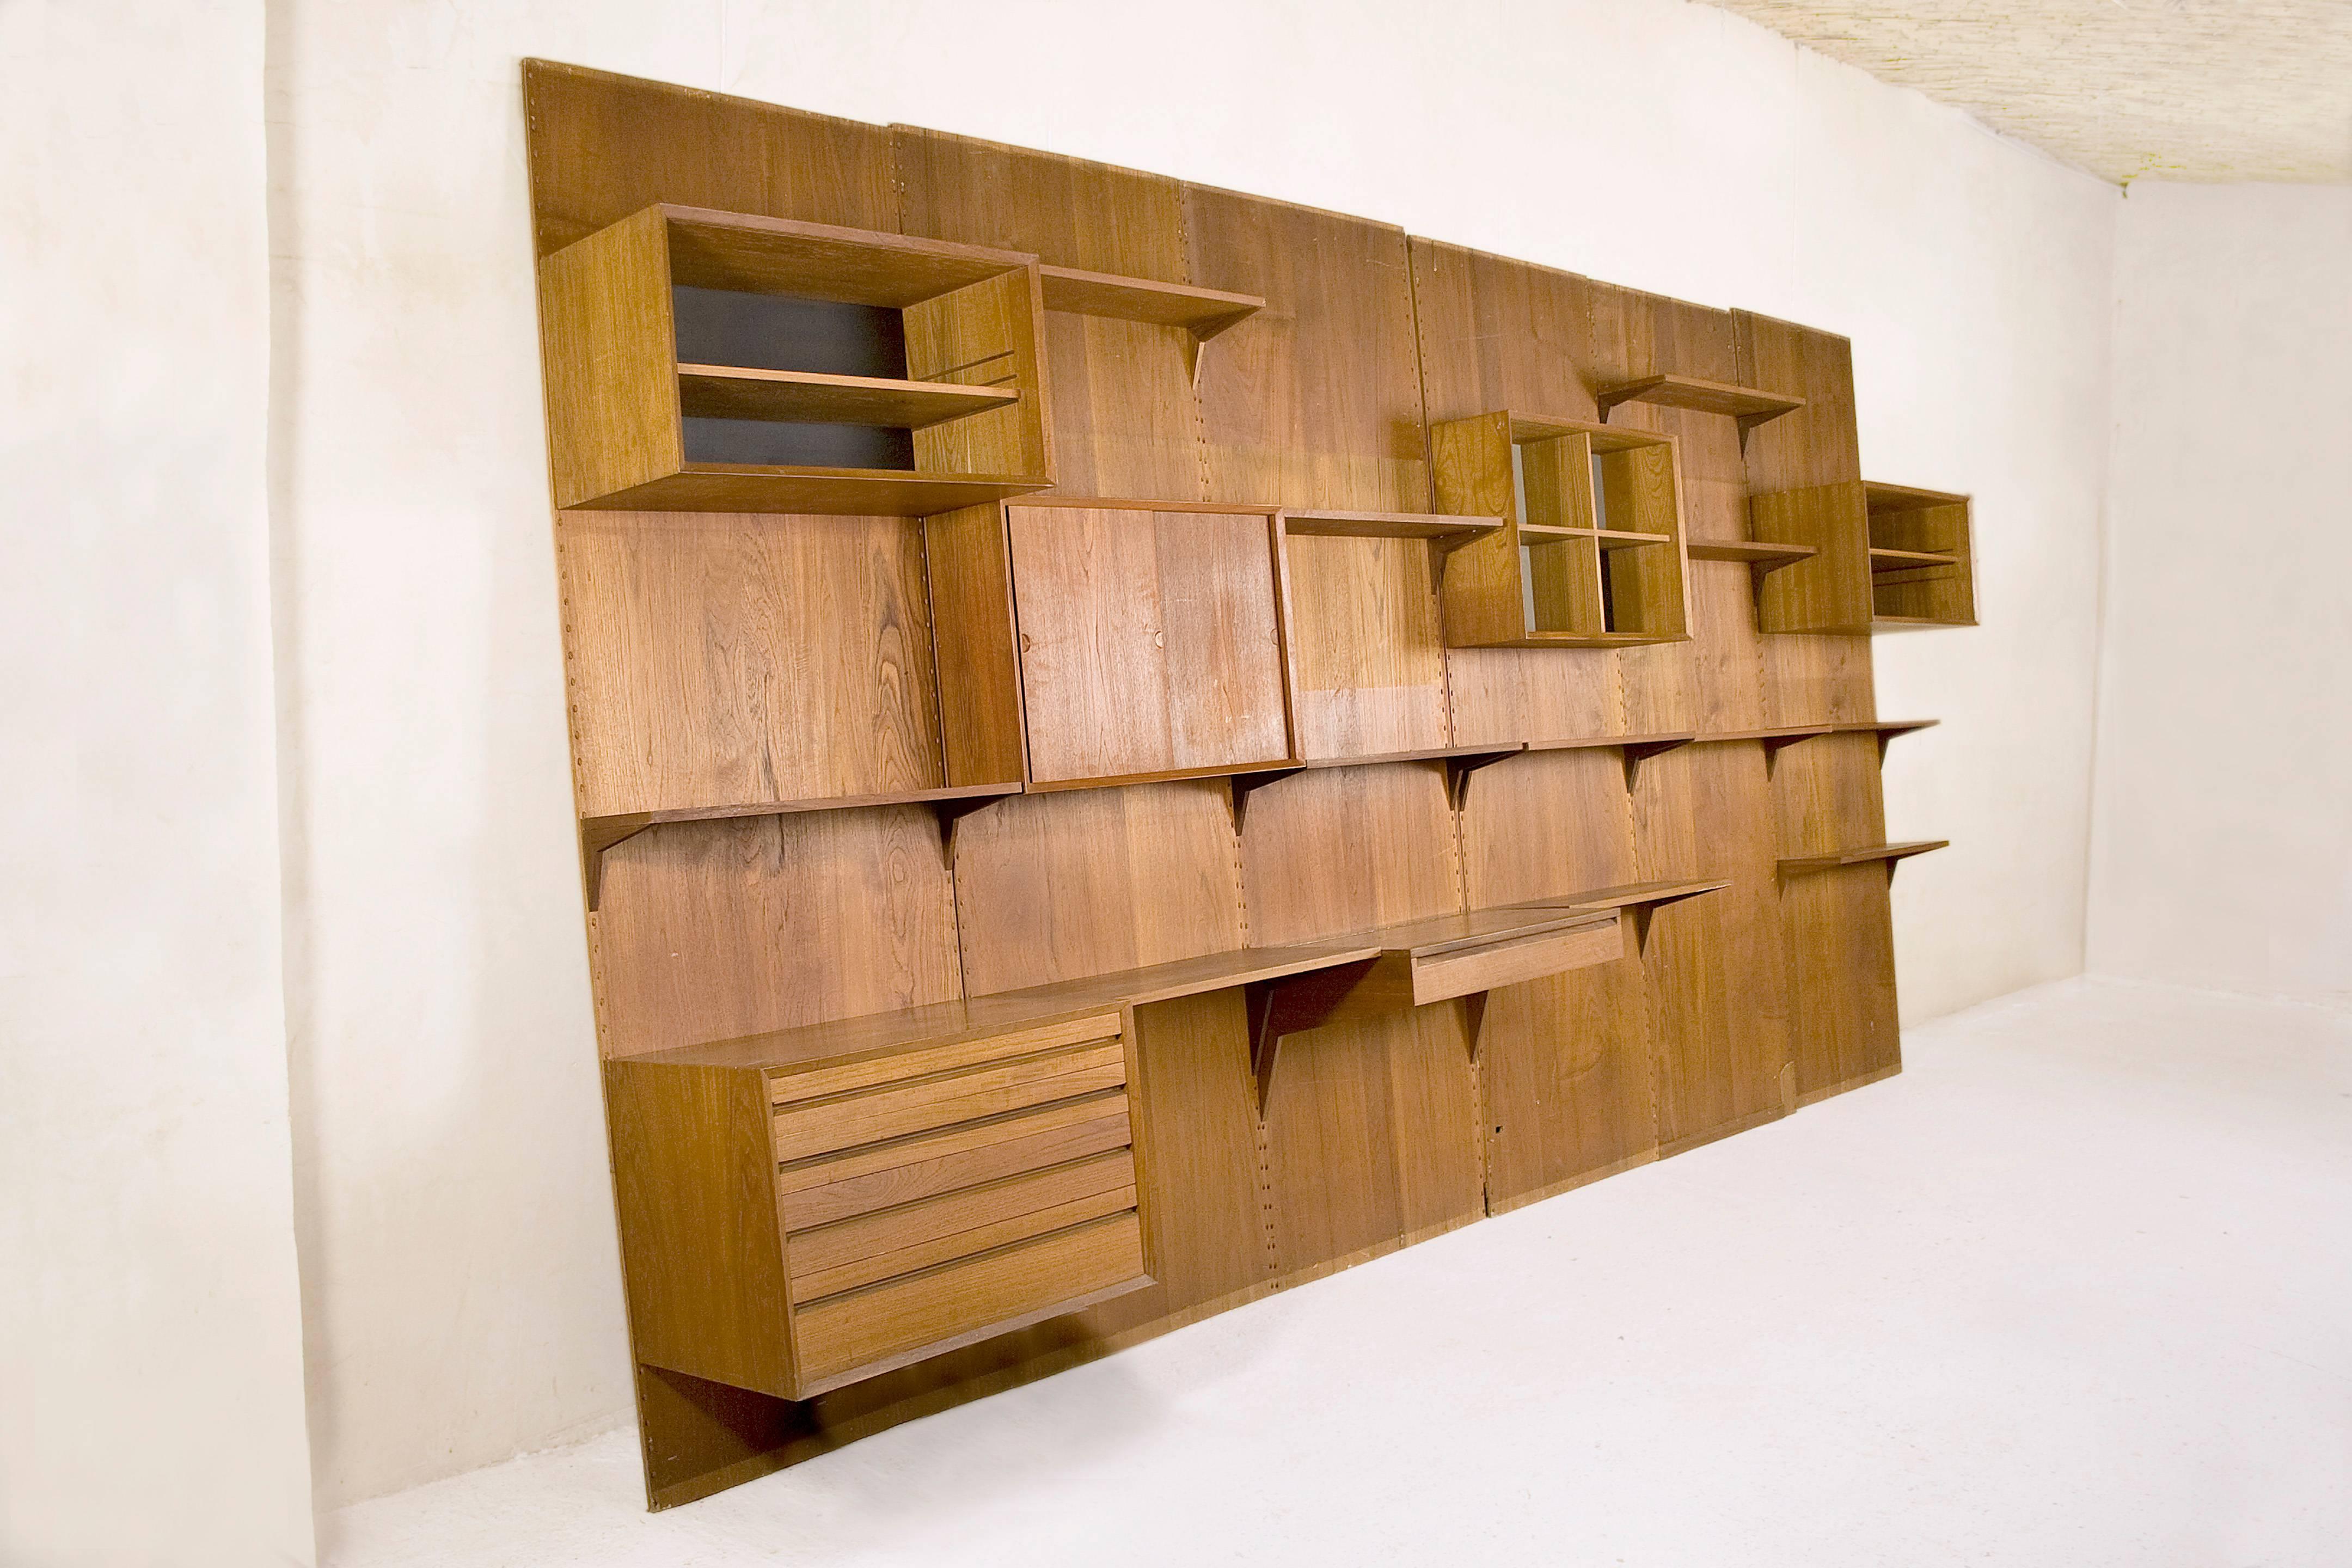 Six-panel teak wall unit by Poul Cadovious
Highly versatile and functional wall unit
Includes movable shelves, drawers, desk top, etc,
circa 1950, Denmark
Very good vintage condition.